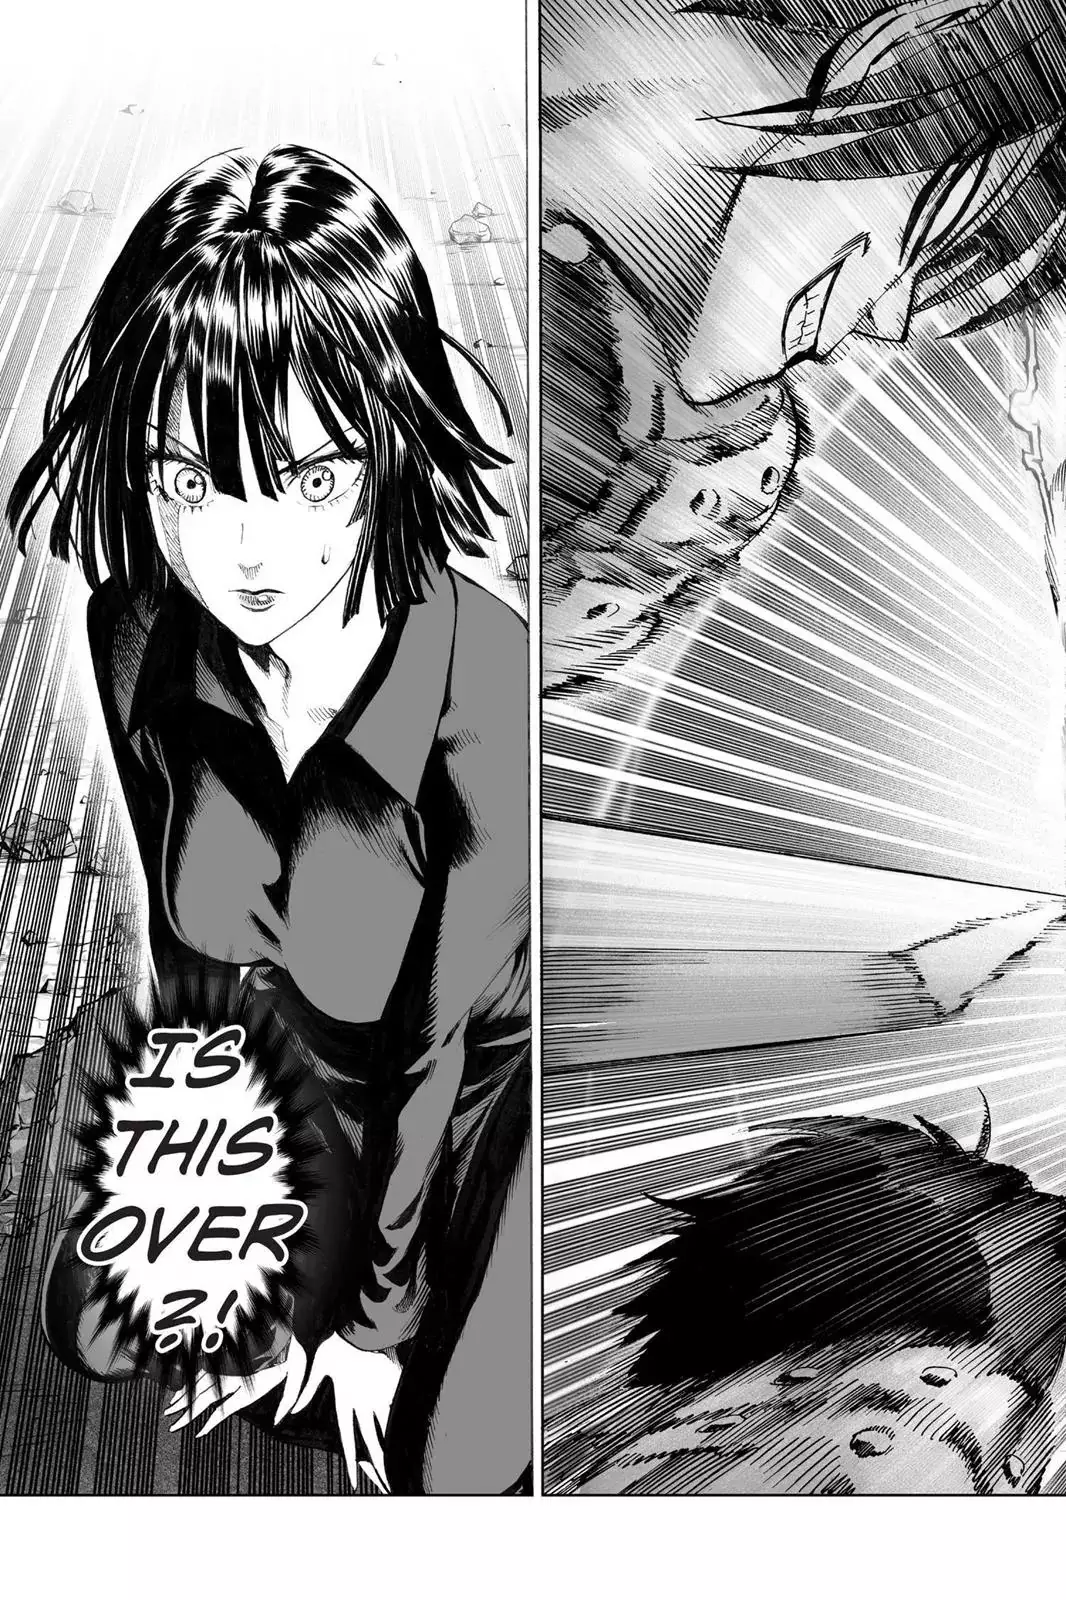 One Punch Man Chapter 44, READ One Punch Man Chapter 44 ONLINE, lost in the cloud genre,lost in the cloud gif,lost in the cloud girl,lost in the cloud goods,lost in the cloud goodreads,lost in the cloud,lost ark cloud gaming,lost odyssey cloud gaming,lost in the cloud fanart,lost in the cloud fanfic,lost in the cloud fandom,lost in the cloud first kiss,lost in the cloud font,lost in the cloud ending,lost in the cloud episode 97,lost in the cloud edit,lost in the cloud explained,lost in the cloud dog,lost in the cloud discord server,lost in the cloud desktop wallpaper,lost in the cloud drawing,can't find my cloud on network,lost in the cloud characters,lost in the cloud chapter 93 release date,lost in the cloud birthday,lost in the cloud birthday art,lost in the cloud background,lost in the cloud banner,lost in the clouds meaning,what is the black cloud in lost,lost in the cloud ao3,lost in the cloud anime,lost in the cloud art,lost in the cloud author twitter,lost in the cloud author instagram,lost in the cloud artist,lost in the cloud acrylic stand,lost in the cloud artist twitter,lost in the cloud art style,lost in the cloud analysis